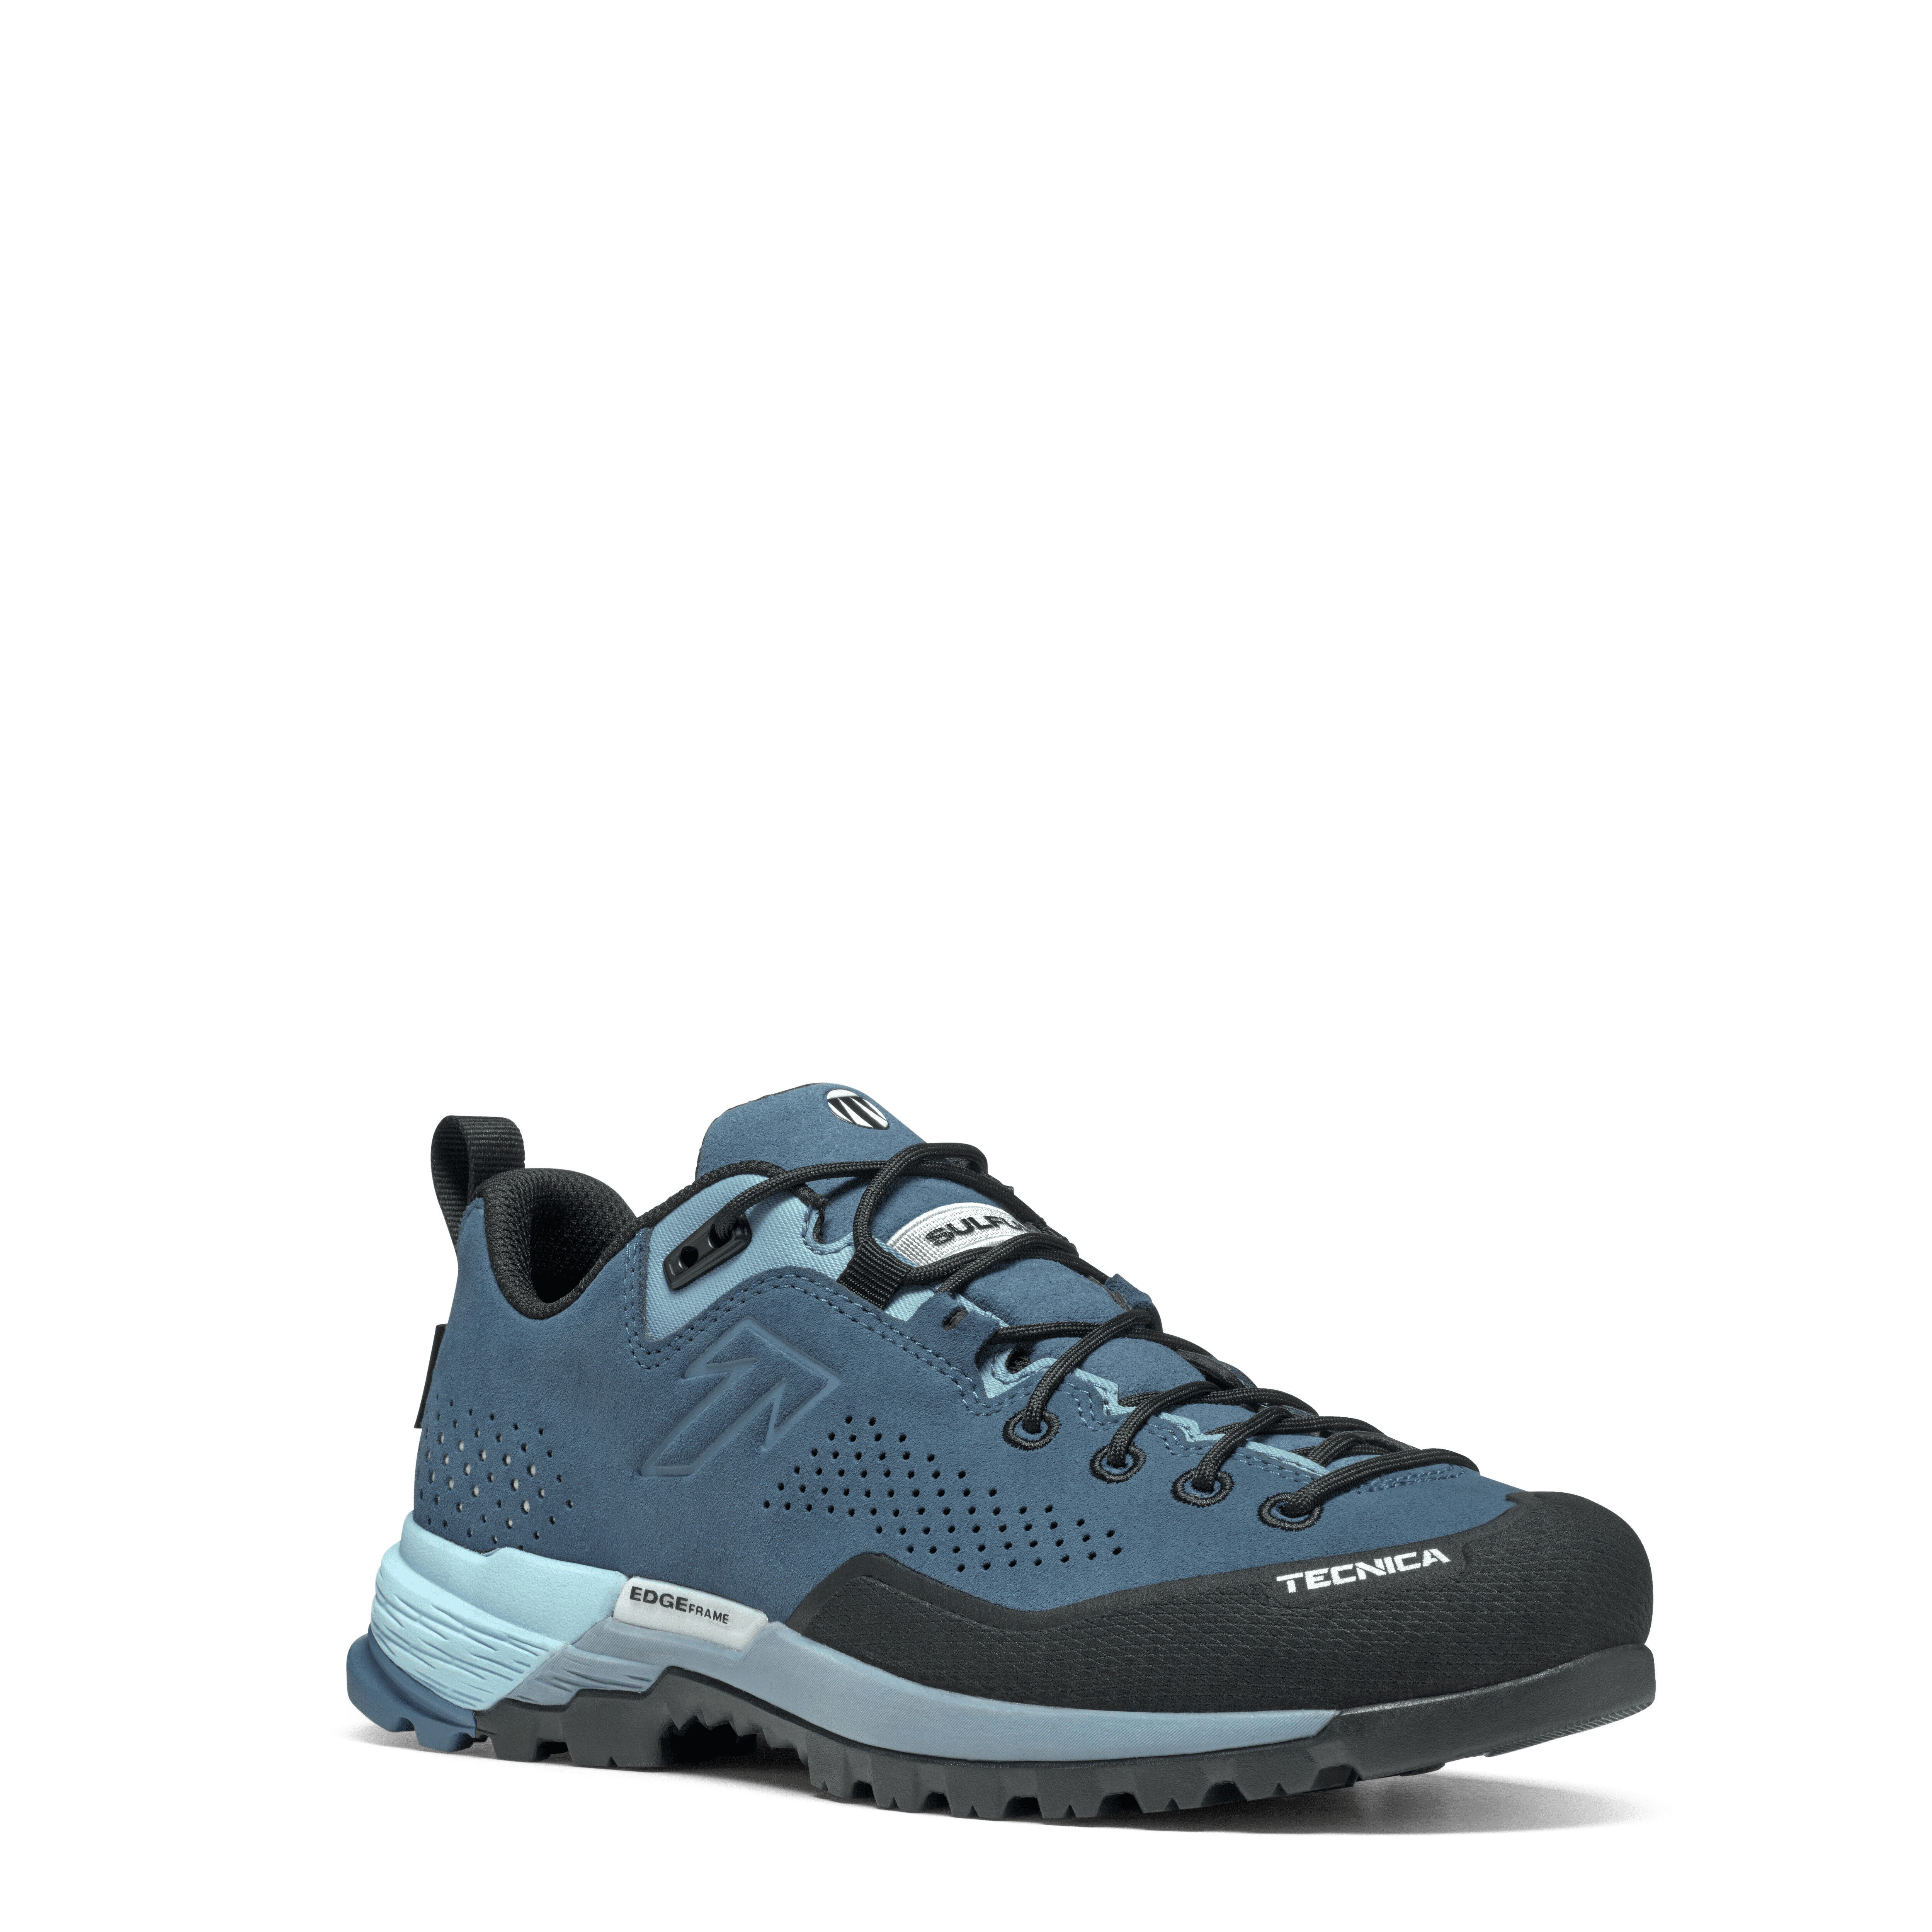 Tecnica Sulfur GTX - Chaussures approche femme | Hardloop